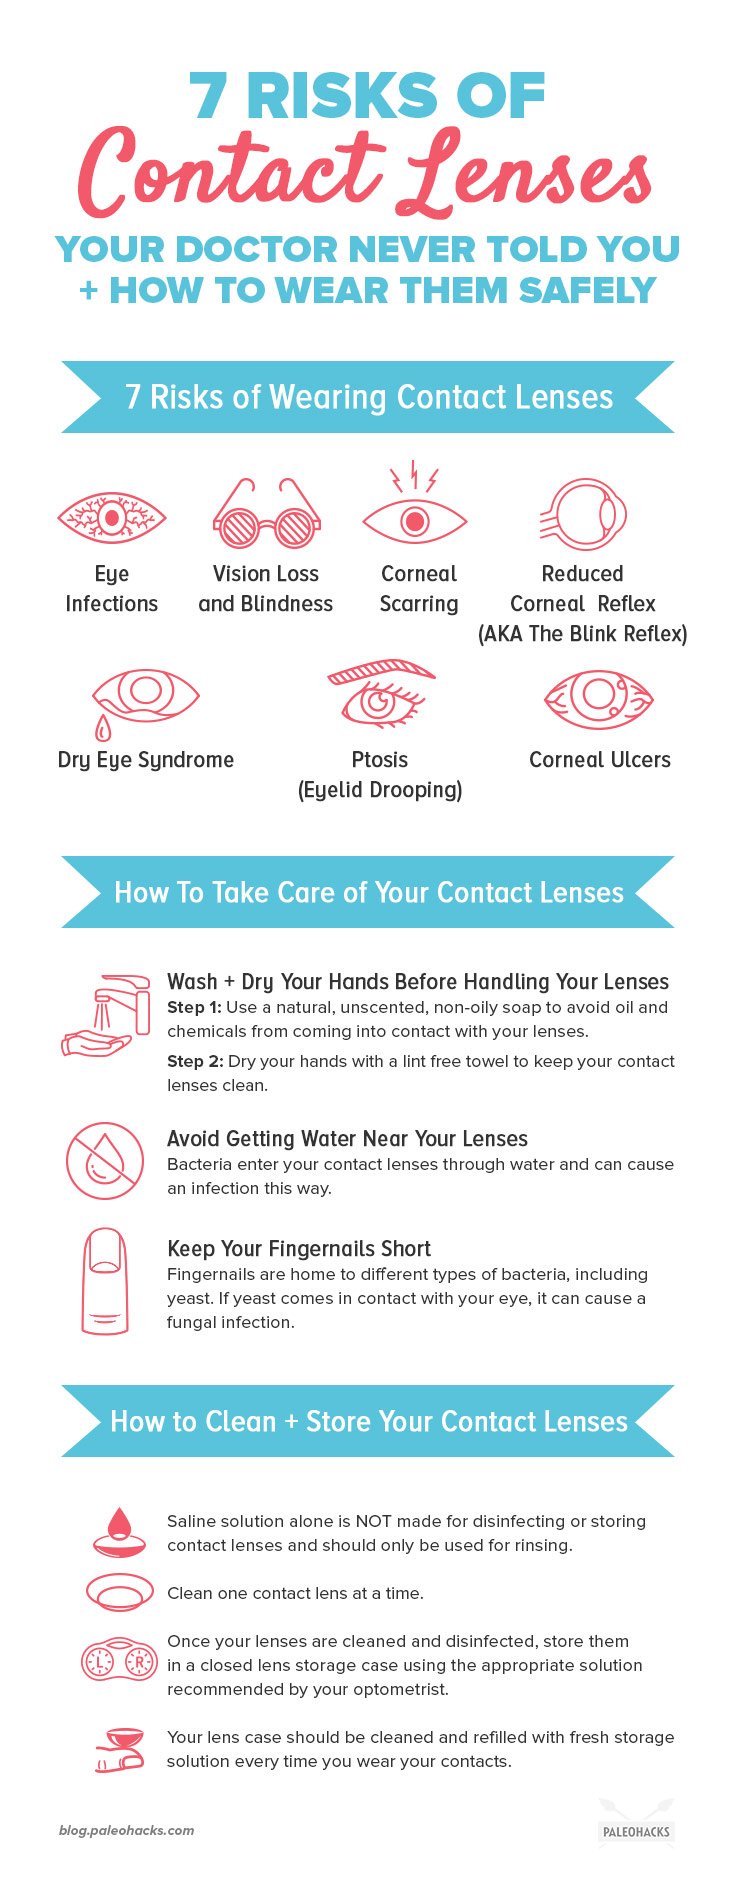 Here are seven big risks that come with wearing contact lenses, and tips on how to safely clean, store and wear contact lenses.